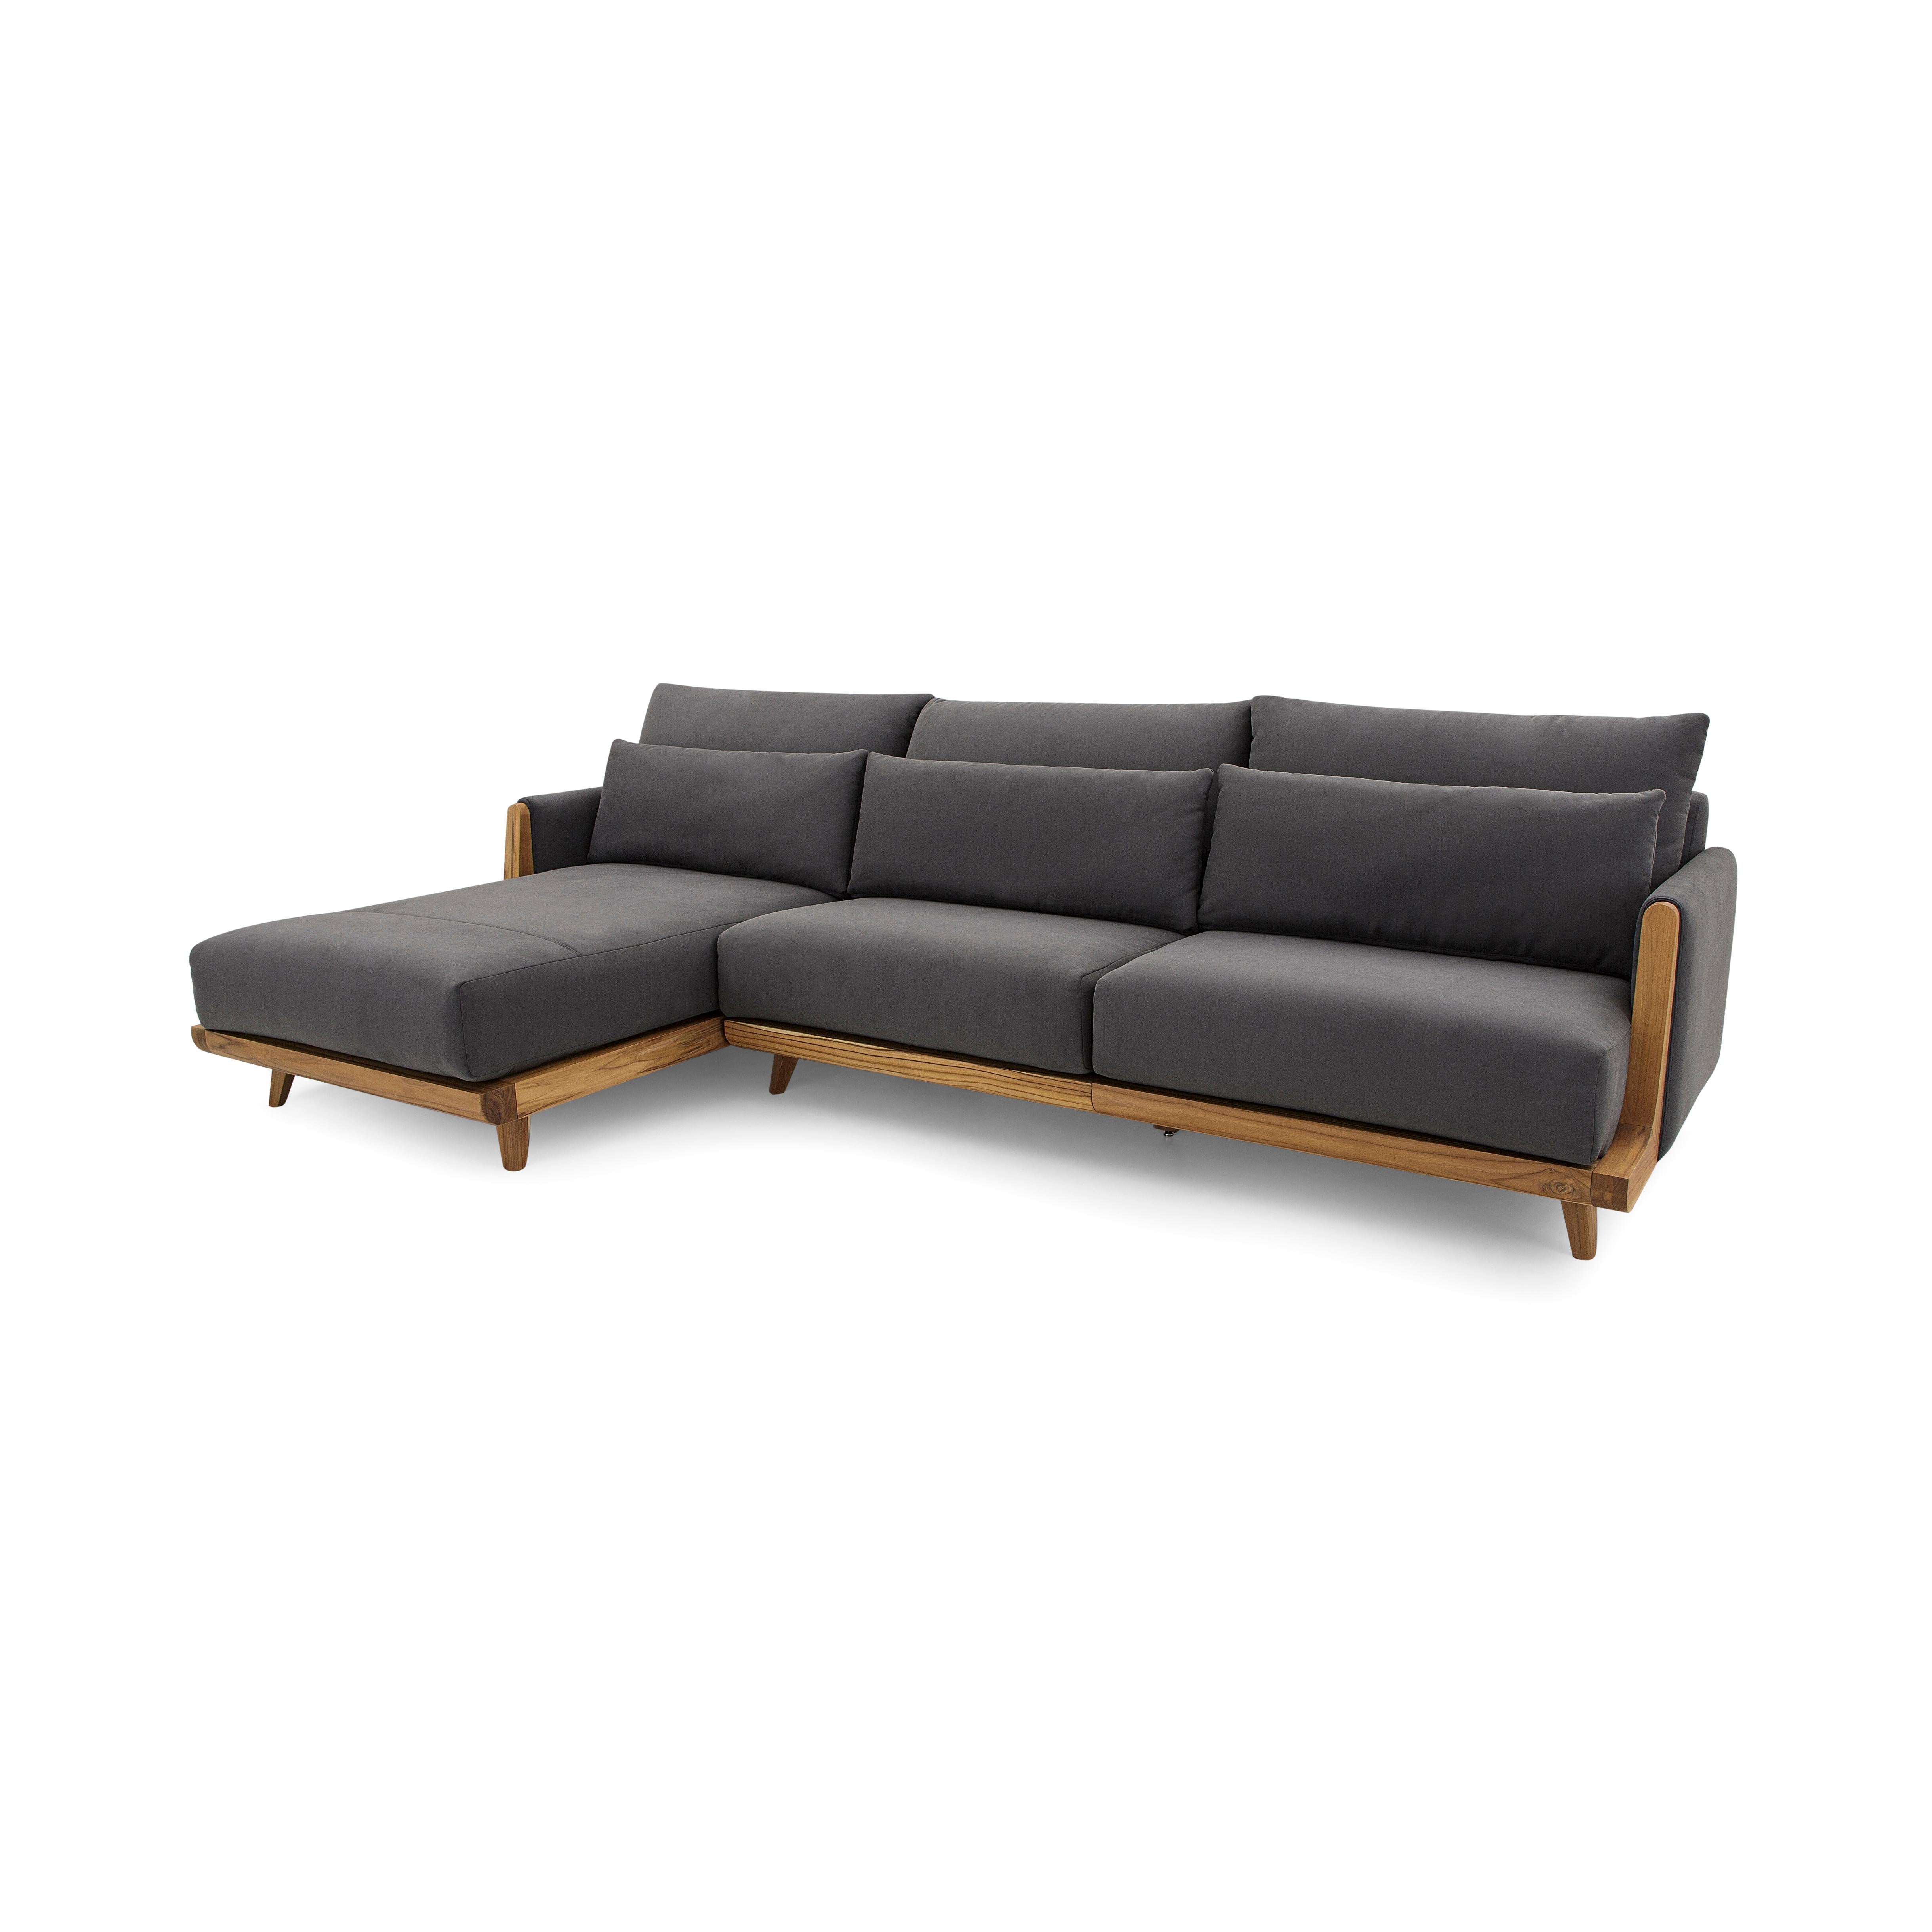 one arm chaise longue